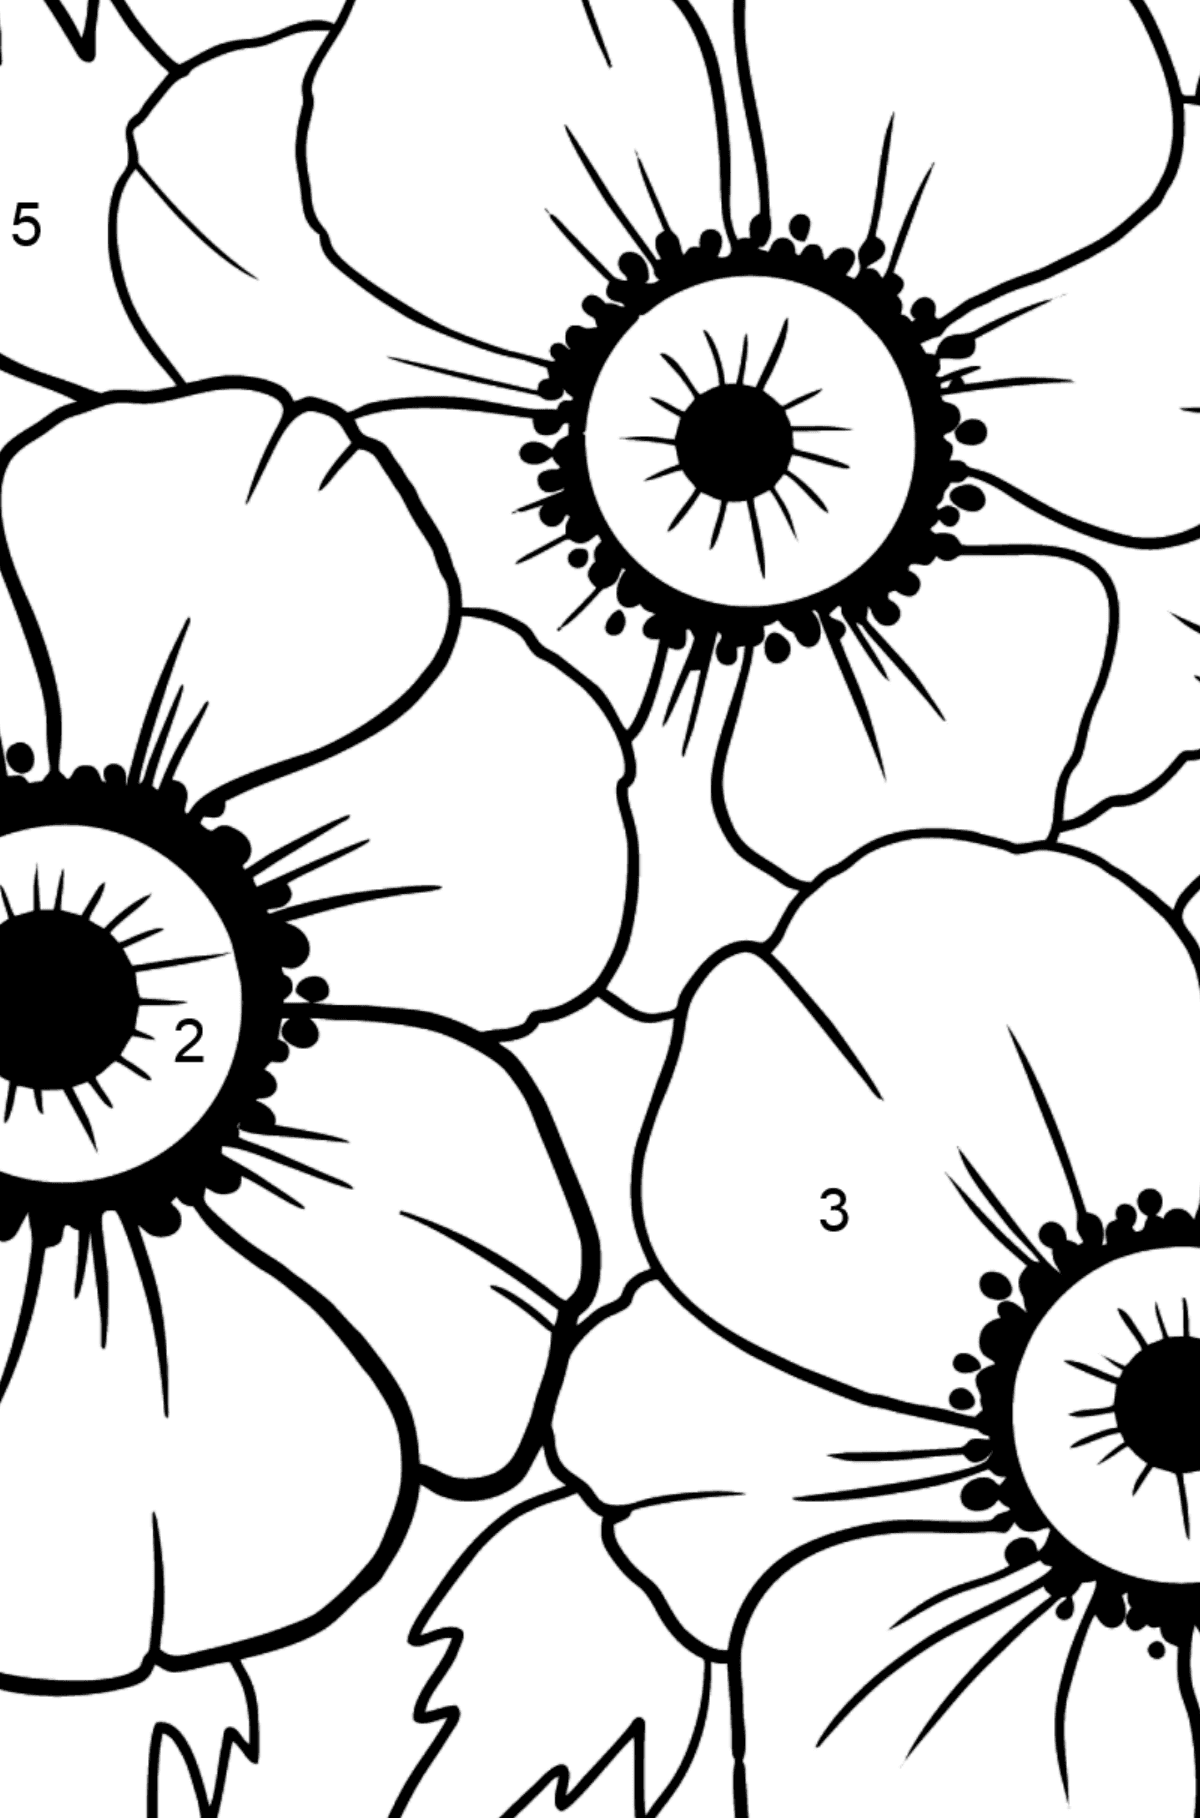 Coloring Page with big flower - A Red and Pink Anemone Coronaria - Coloring by Numbers for Kids